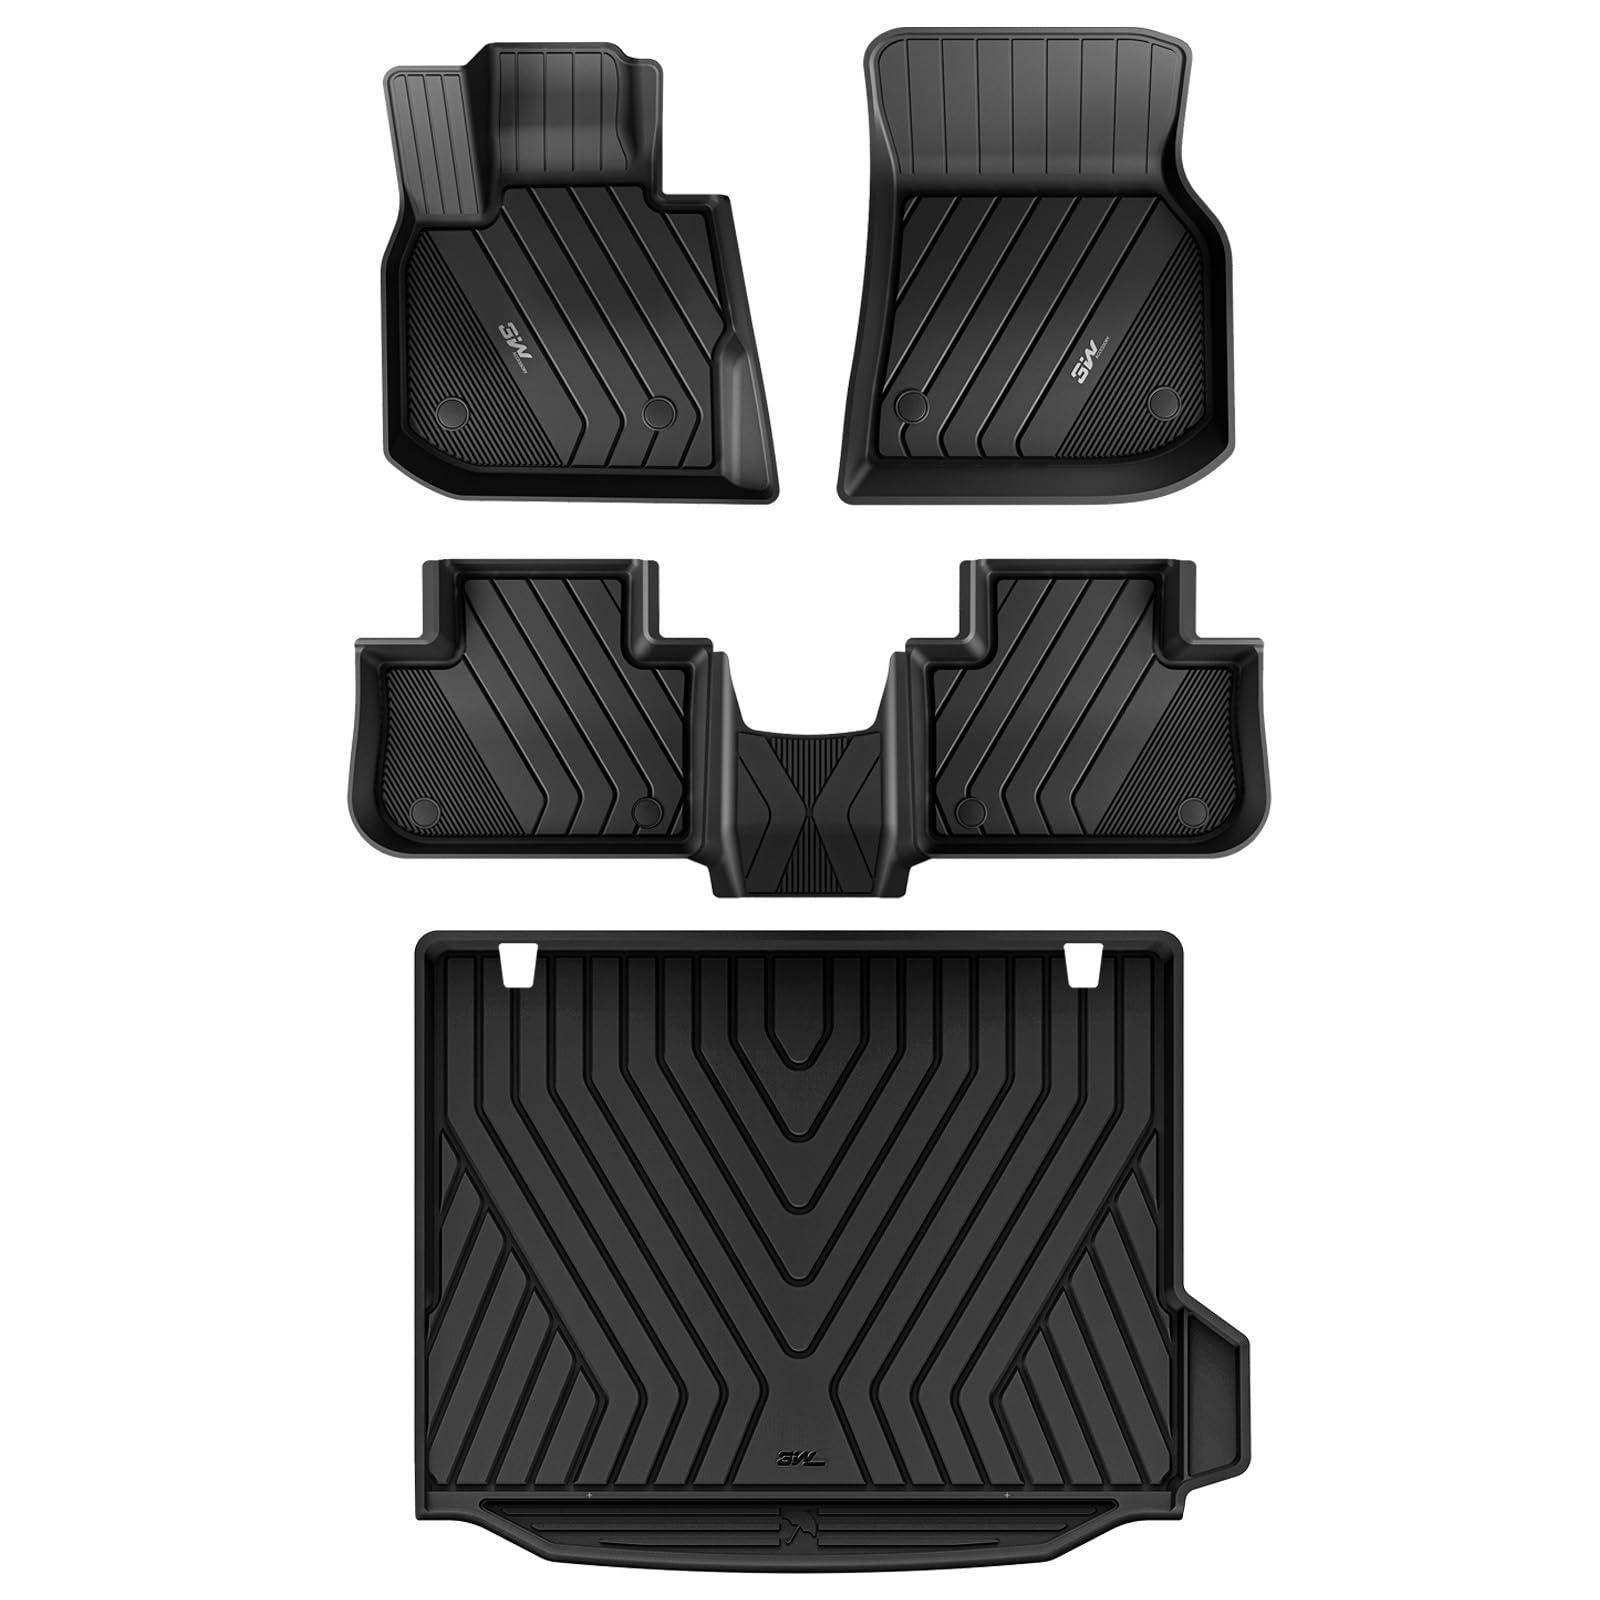 3W BMW X3 30i X3 M40i X3 30e X3 M 2018-2024 Floor Mats & Cargo Mats TPE Material & All-Weather Protection Vehicles & Parts 3Wliners 2018-2024 X3 2018-2024 1st&2nd Row+Trunk Mat